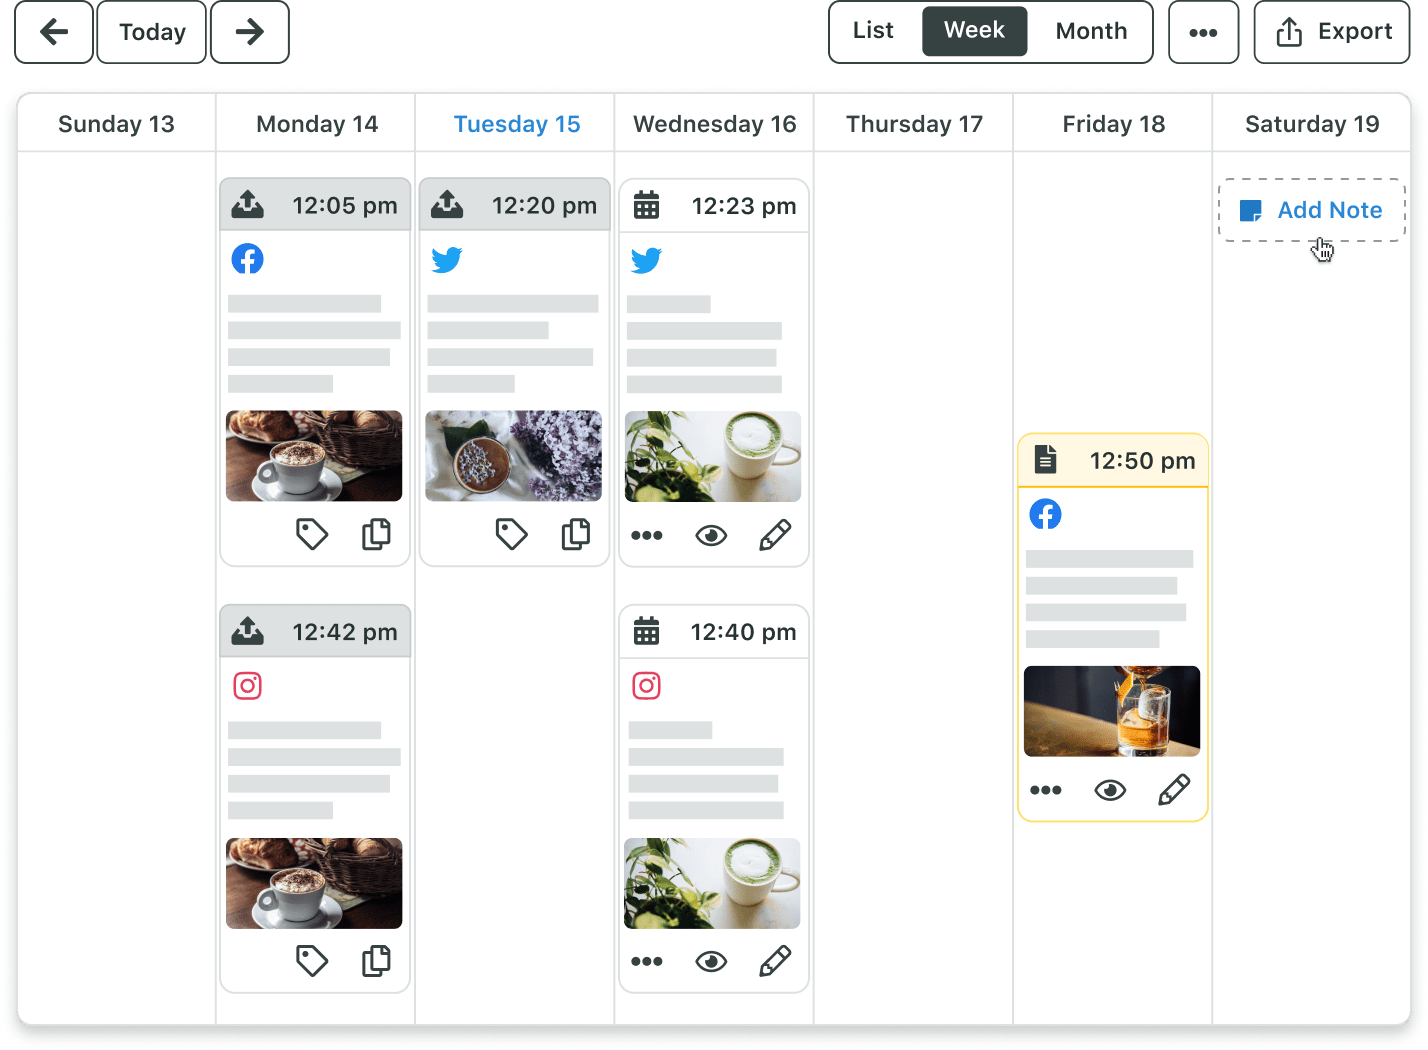 Sprout’s publishing calendar week view shows an overview of all your scheduled posts with options to view, tag and edit content.